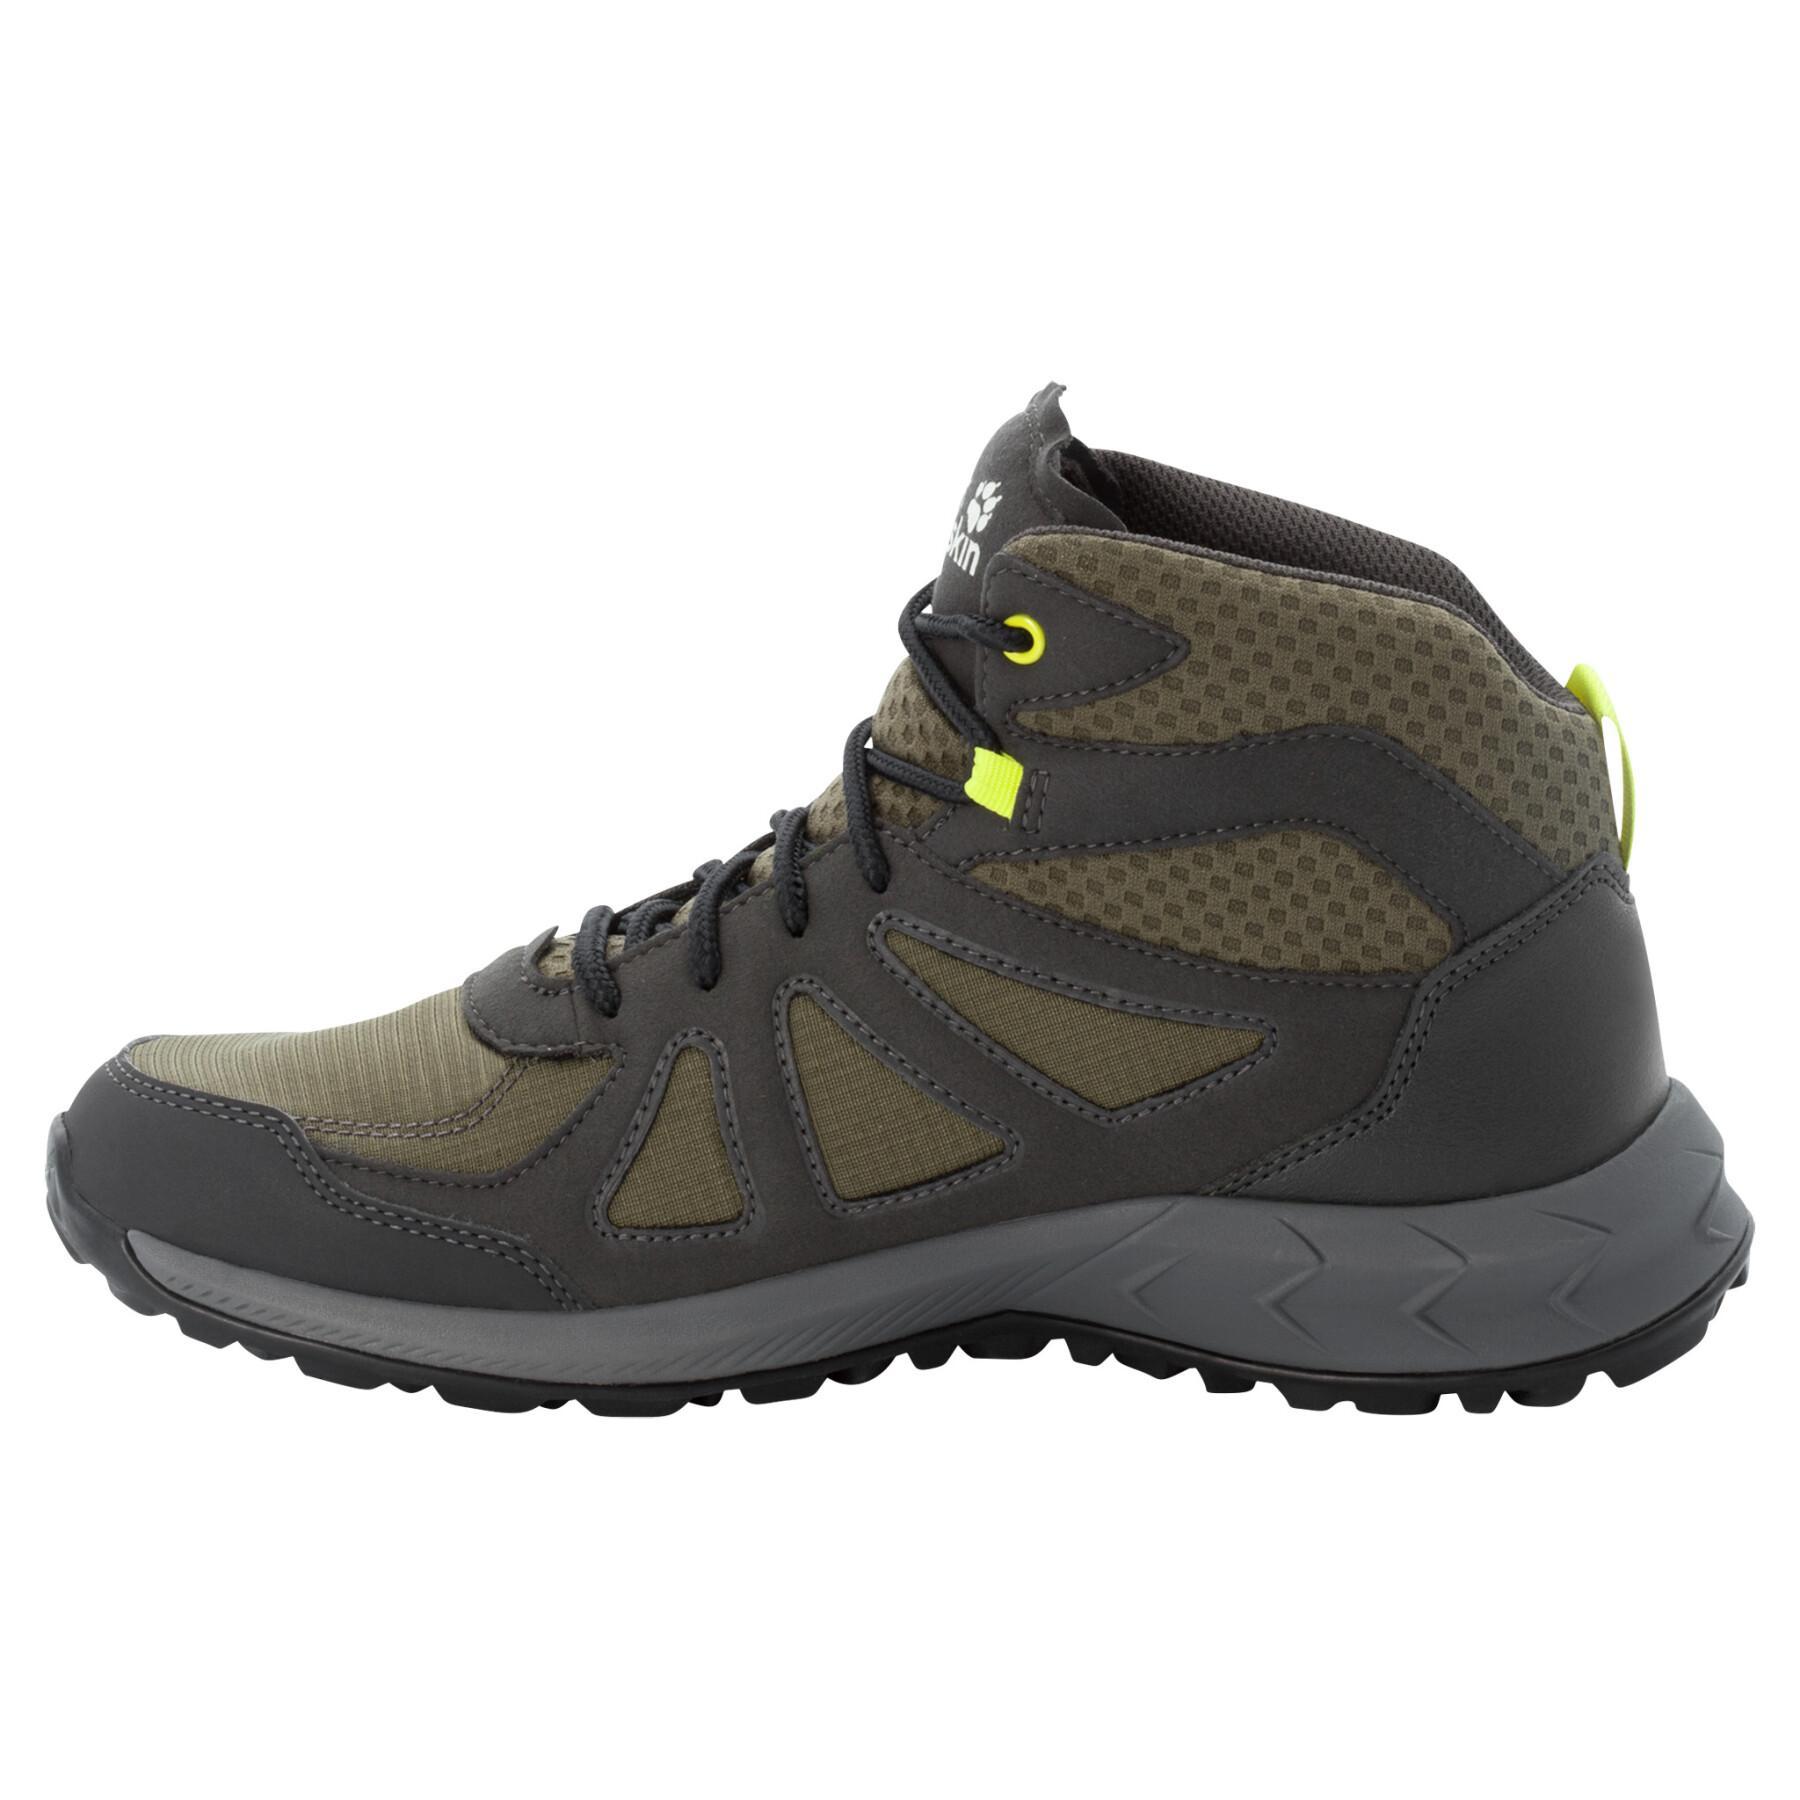 Hiking shoes Jack Wolfskin Woodland 2 Texapore Mid GT